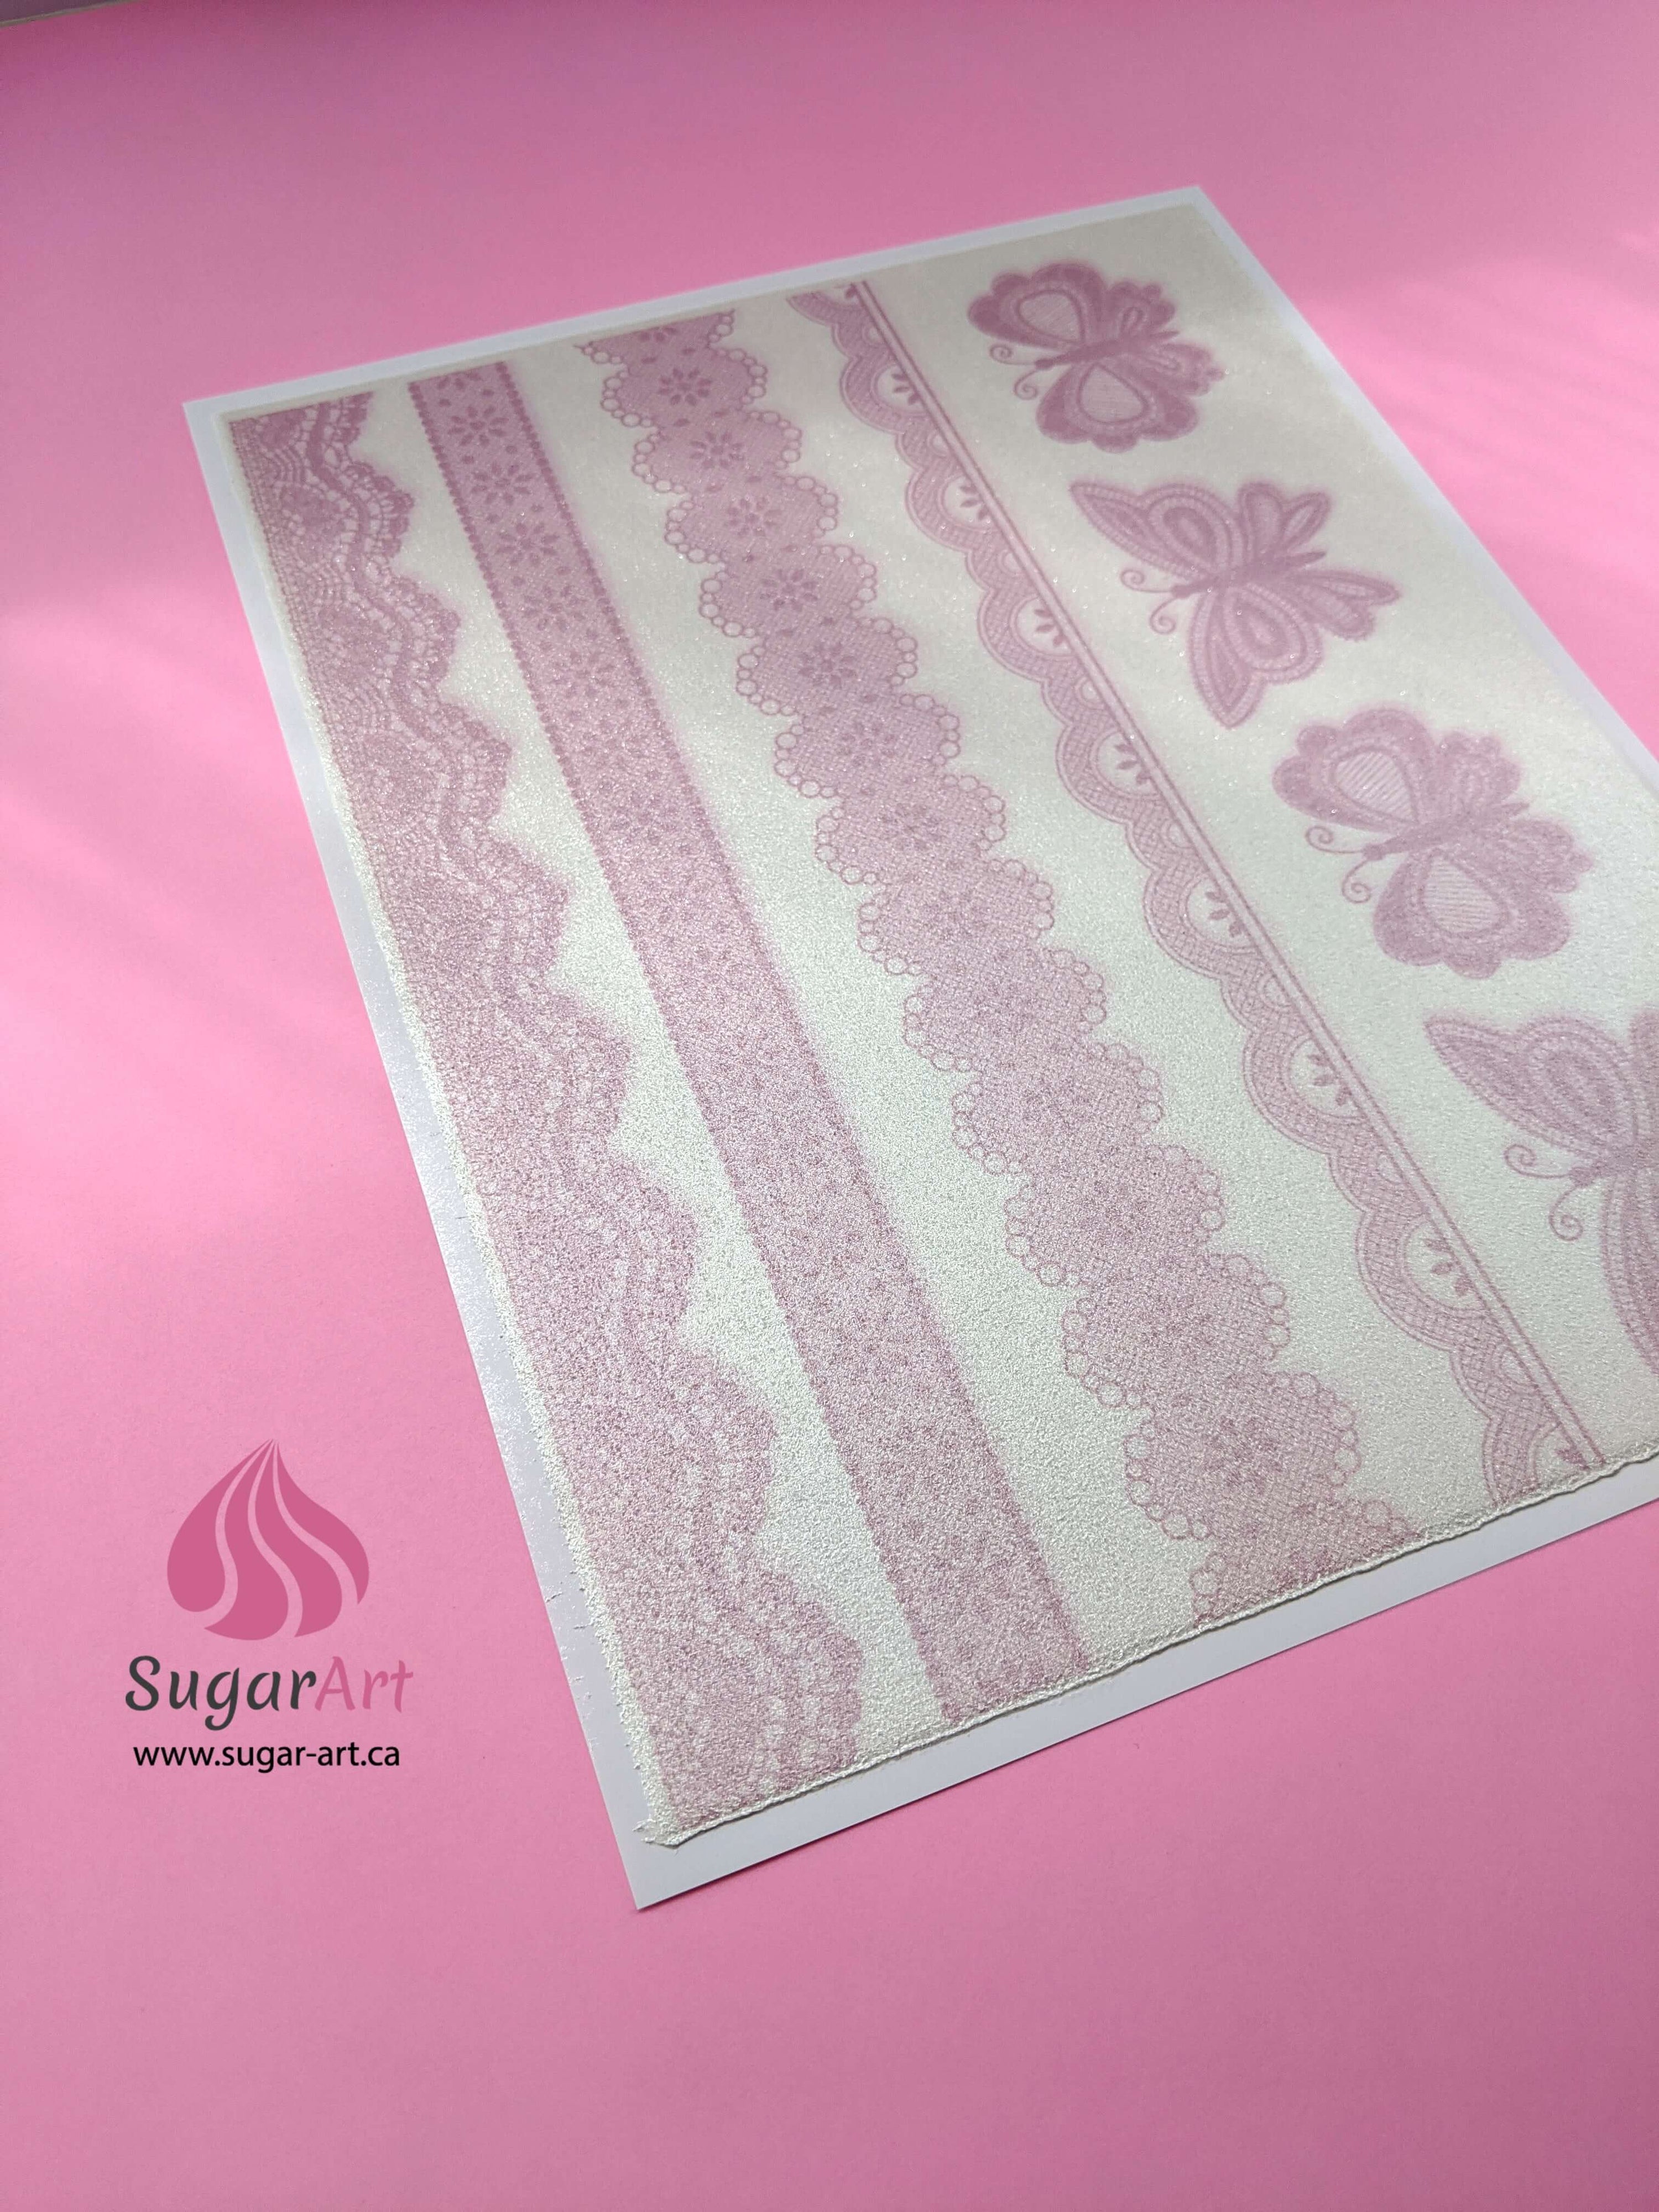 Dusty Rose Lace Borders and Butterflies - Edible Fabric - EF015.